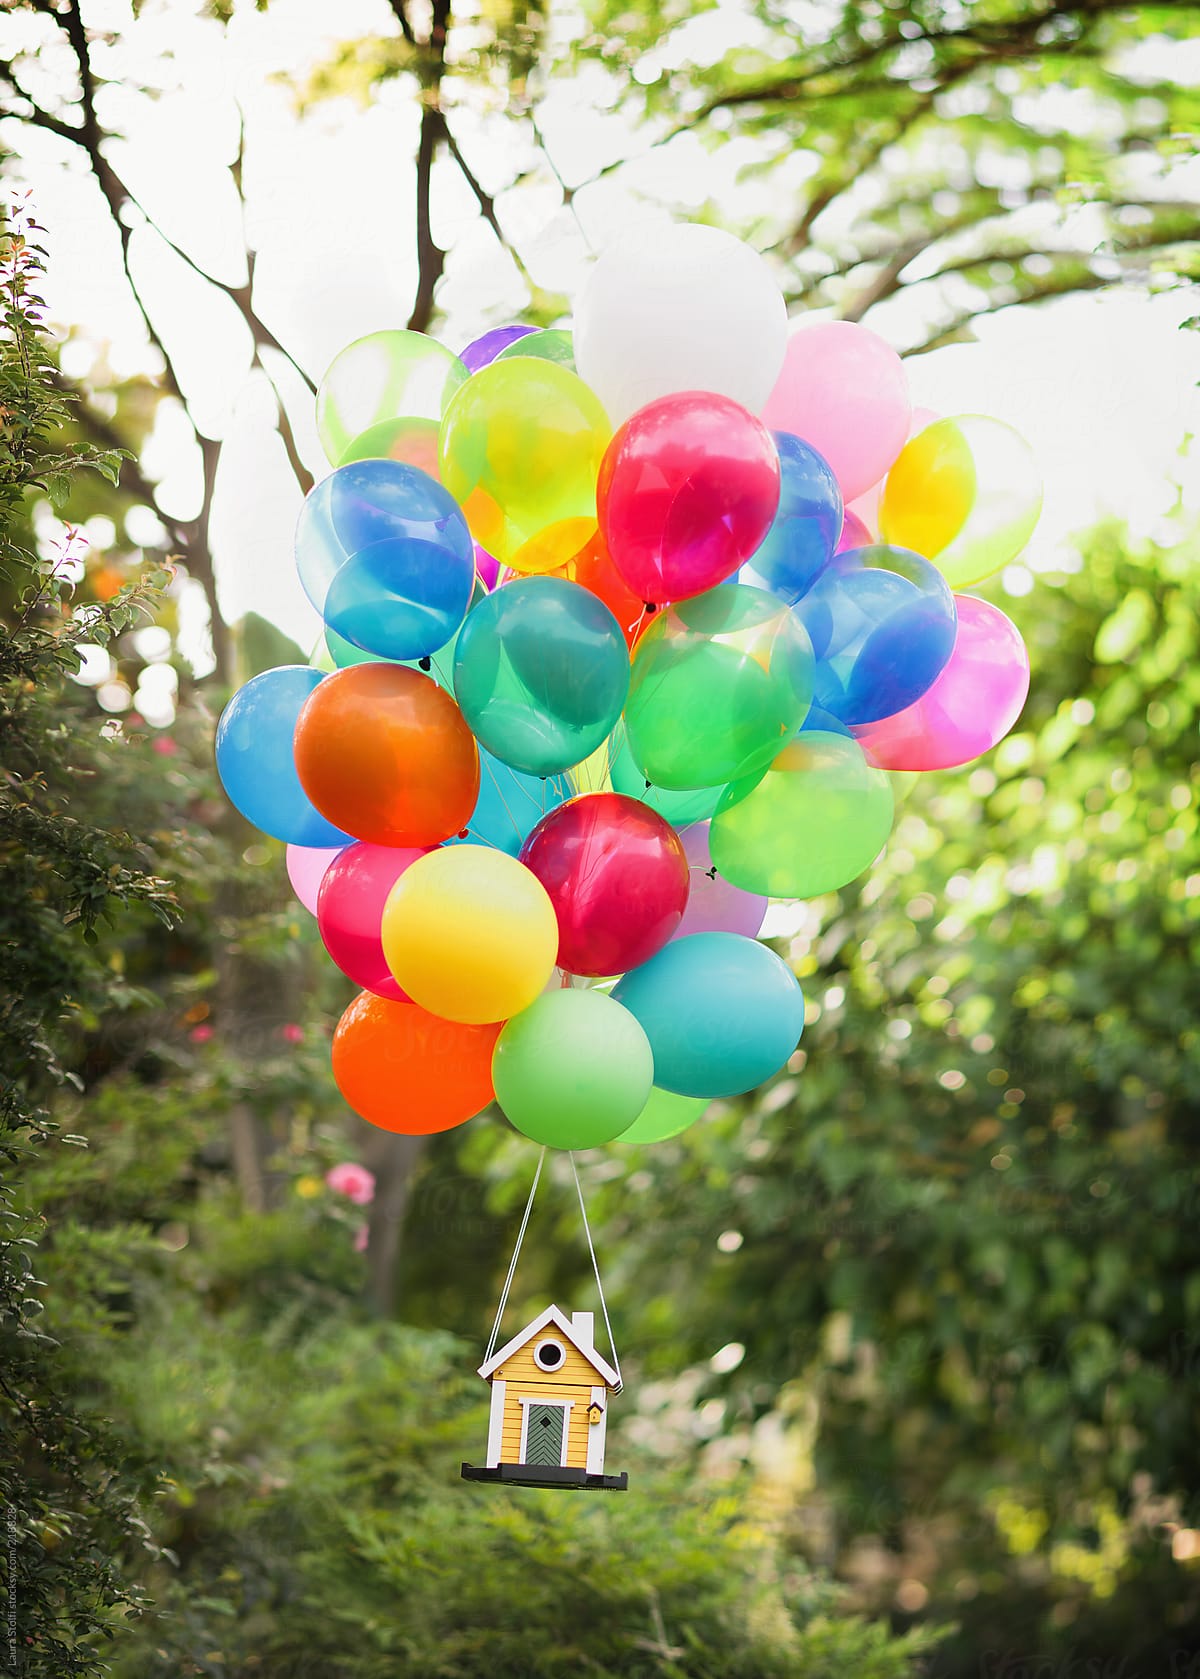 Yellow wooden house flying while lifted by bunch of colourful balloons